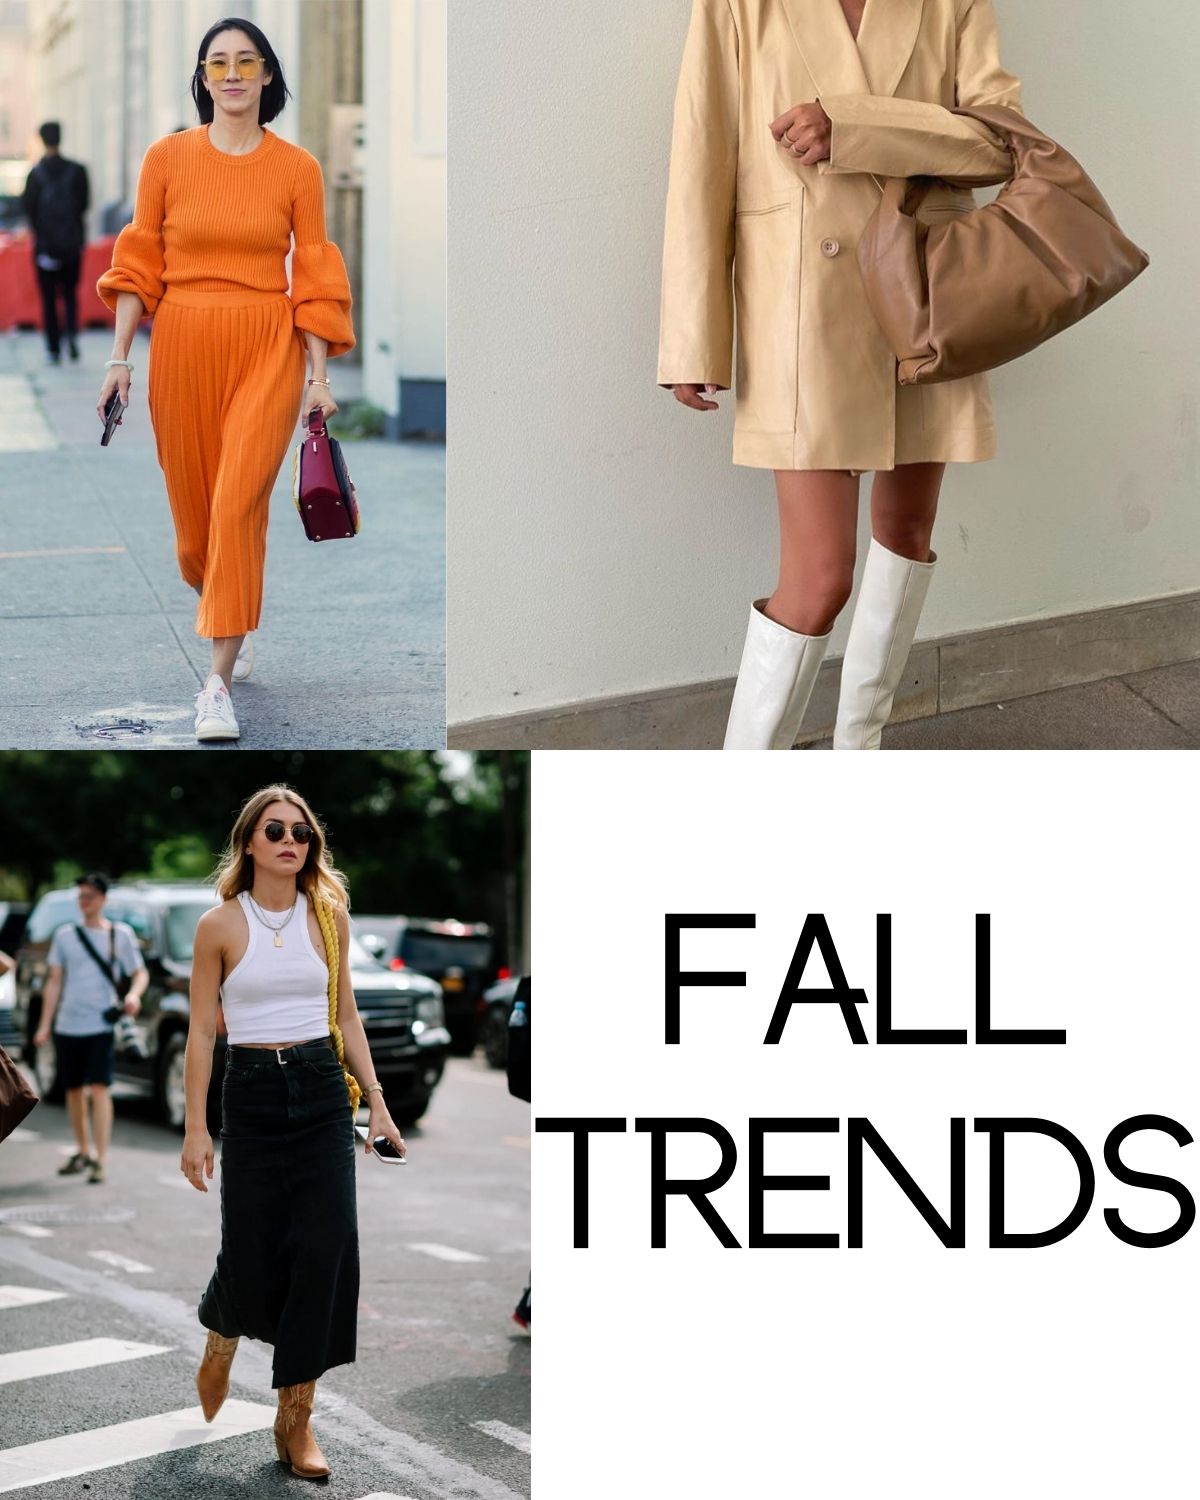 Fall trends: color, boots, and skirts 